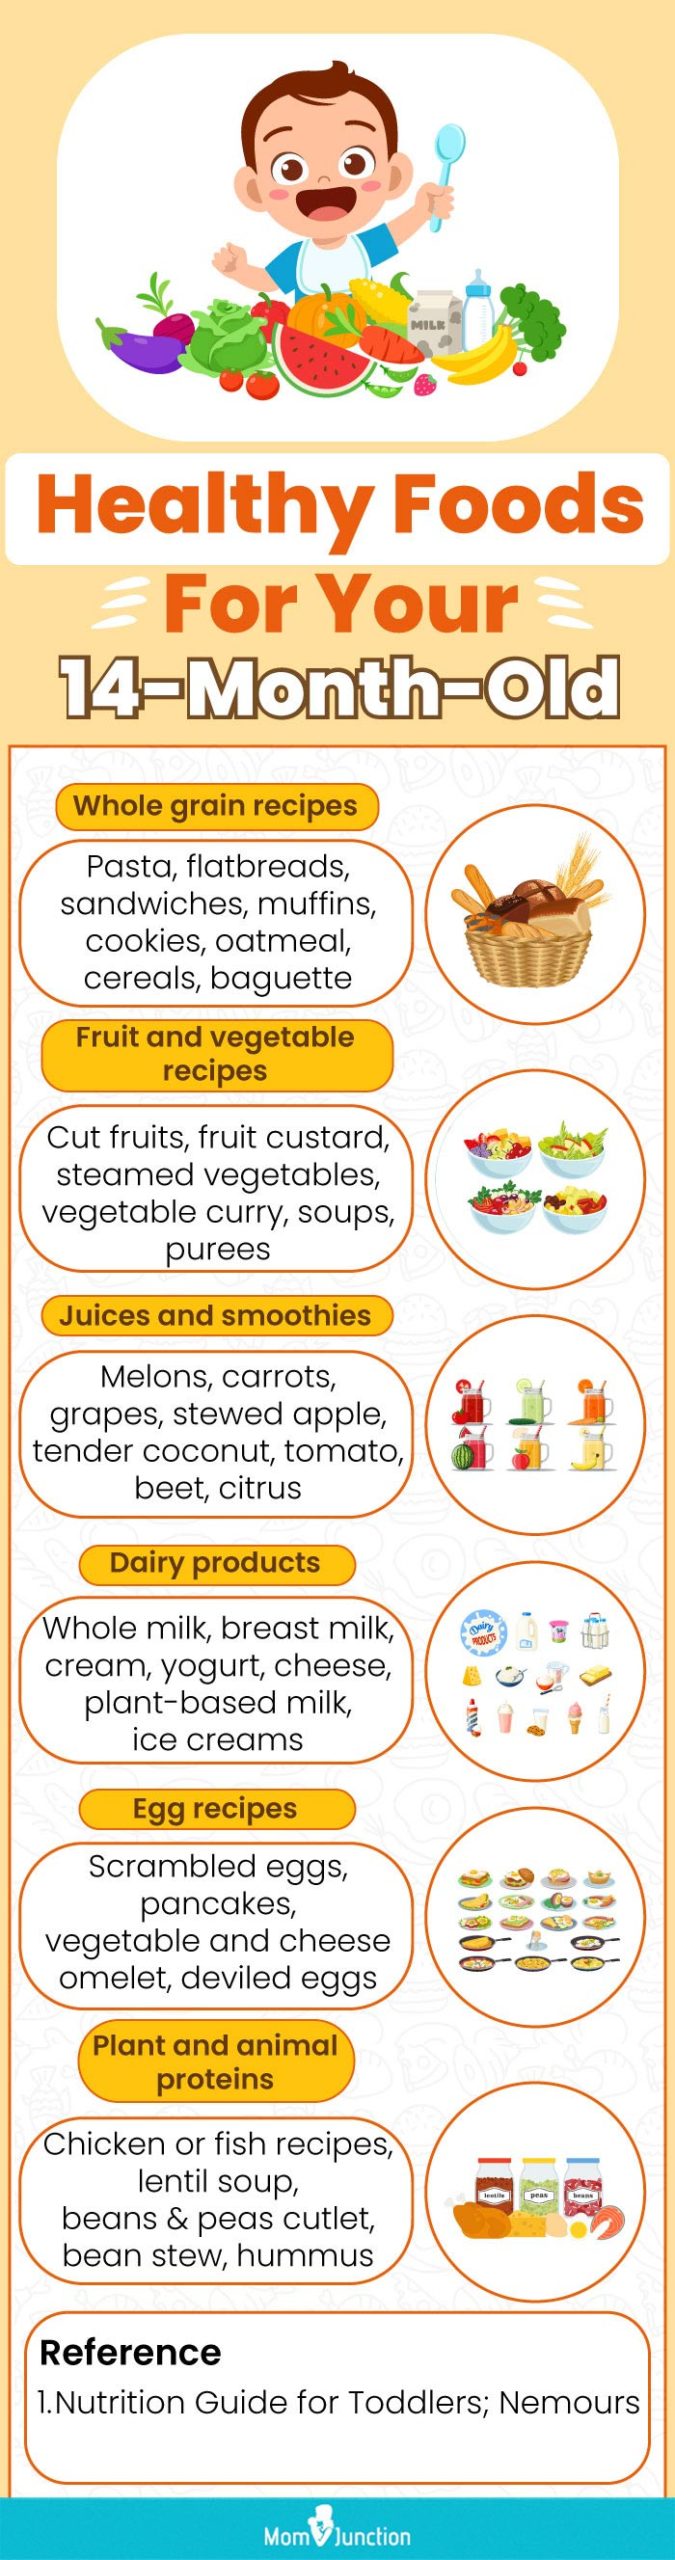 healthy foods for your 14 month old (infographic)